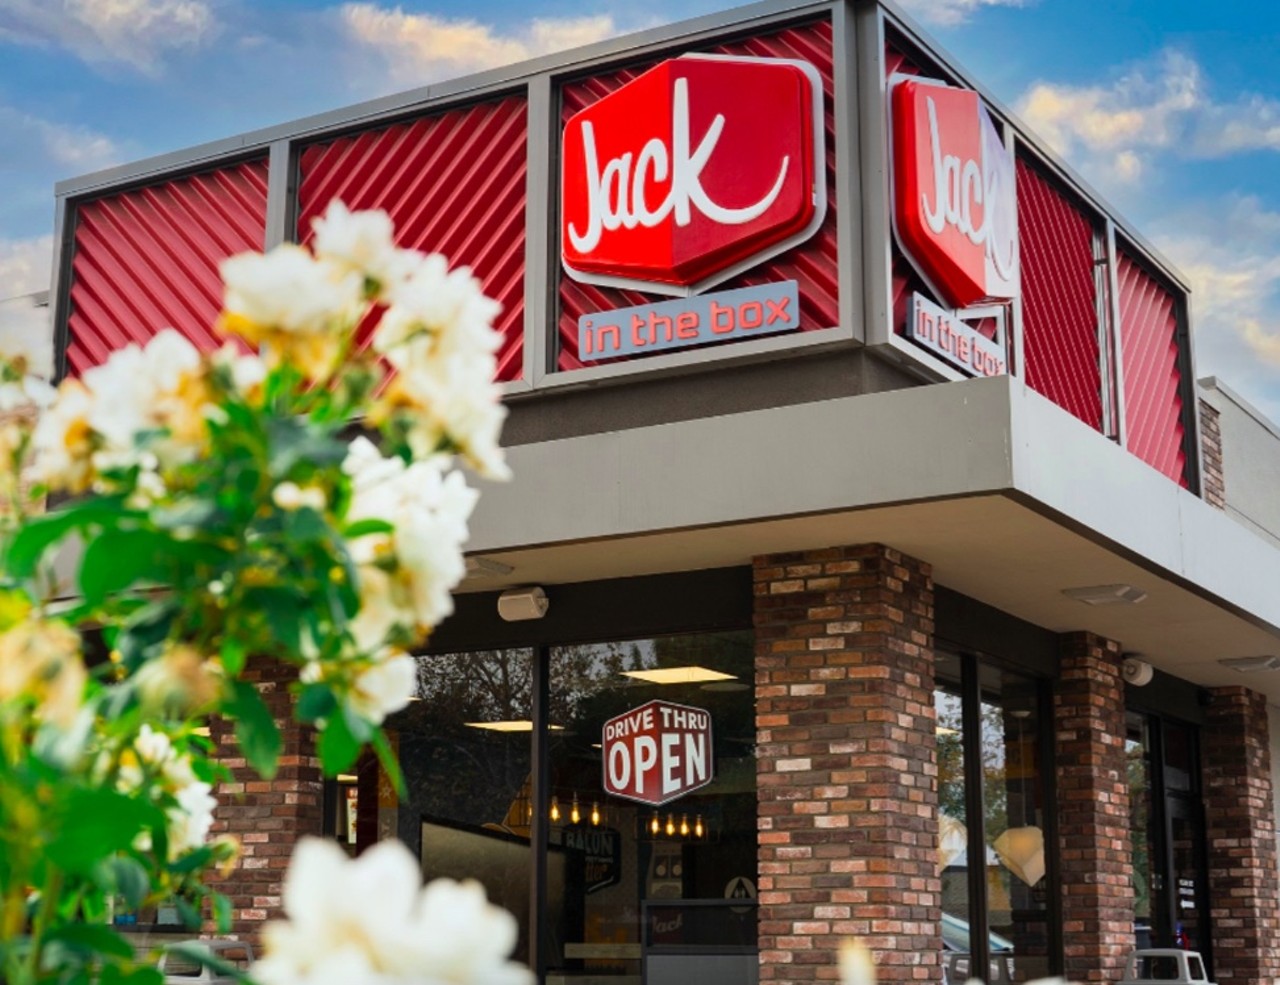 Jack in the Box
TBA
Jack in the Box is about to "pop" its way into Central Florida for the first time in 30 years. The company announced 14 restaurants will open in both Florida and Arkansas as part of a nationwide expansion. Specific locations and opening dates have yet to be announced, but restaurants will open in Orlando, the chain said.